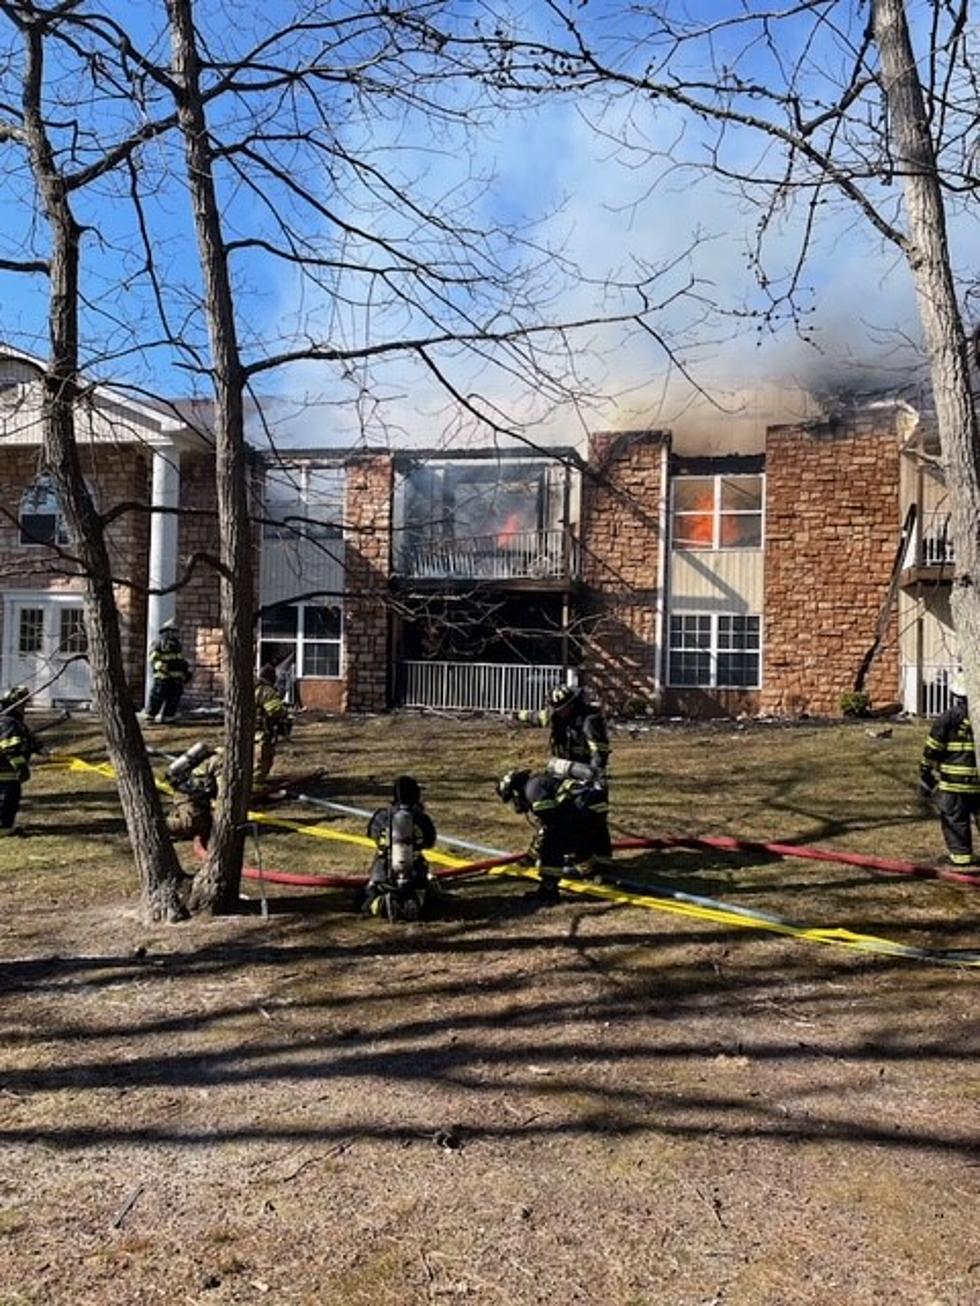 Several Pets Perish in Apartment Fire in Manchester Twp., NJ